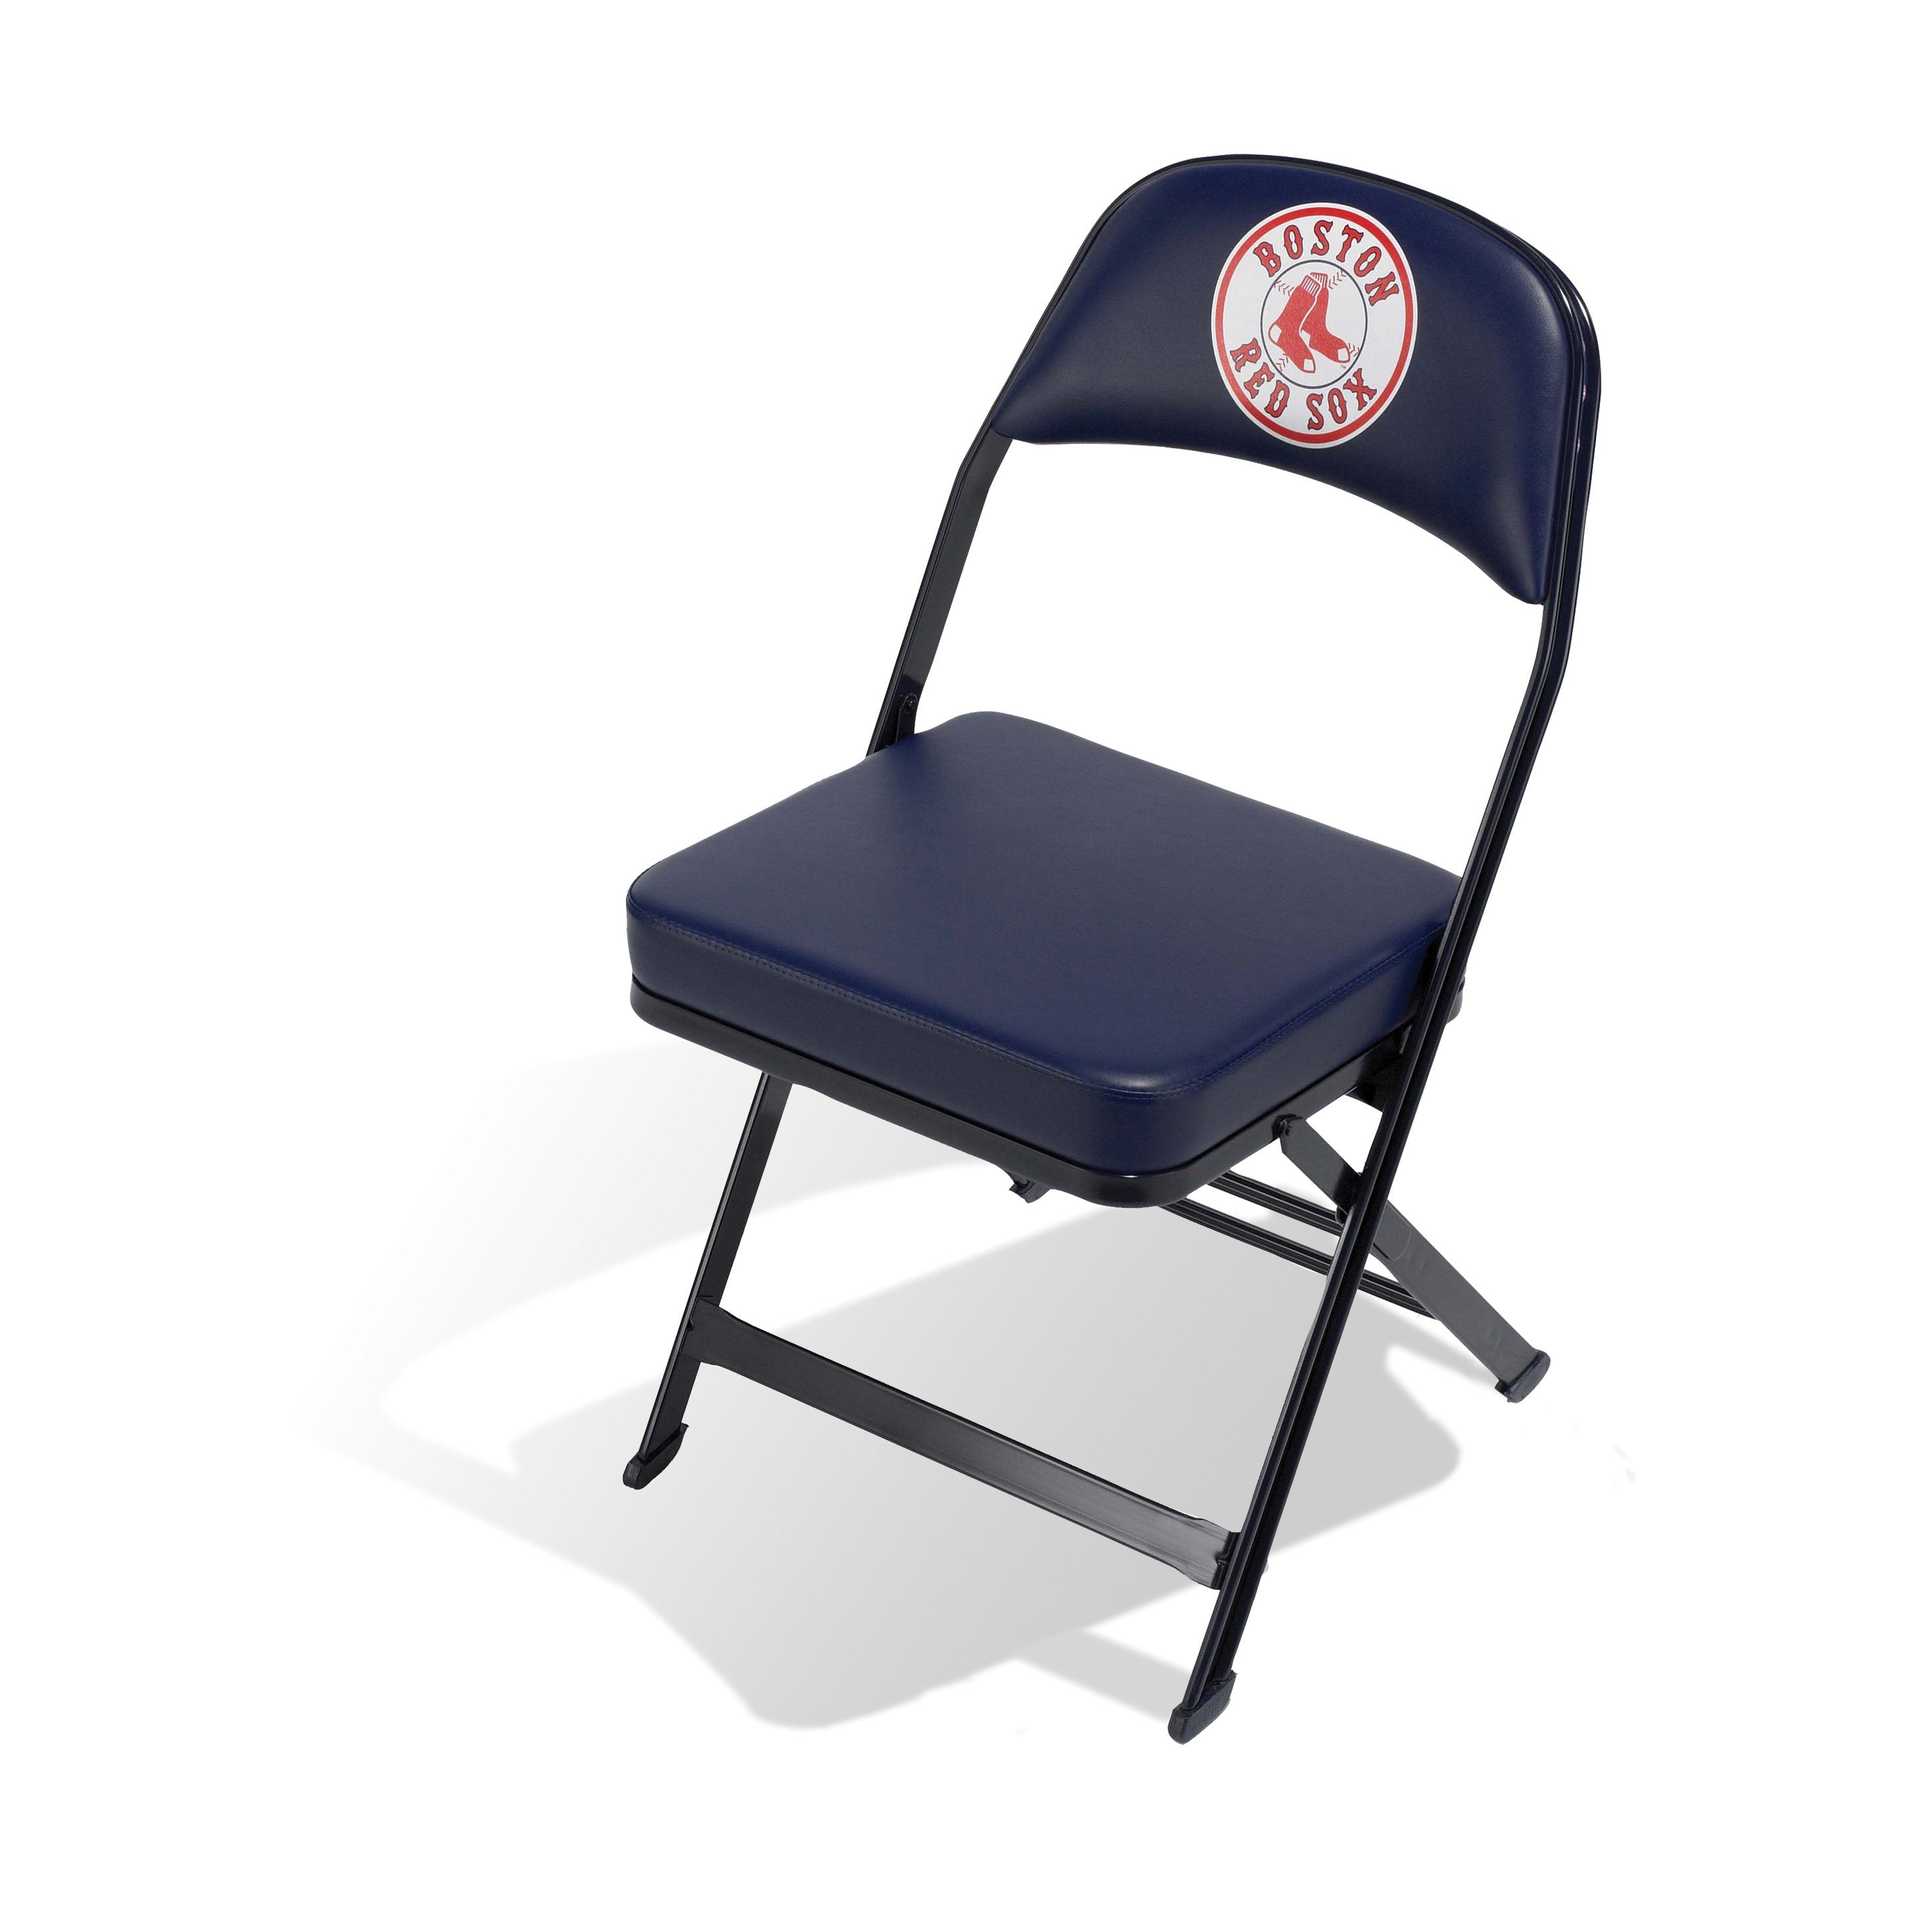 Clarin 3400 Sideline Folding Chair with Logo - Made in USA